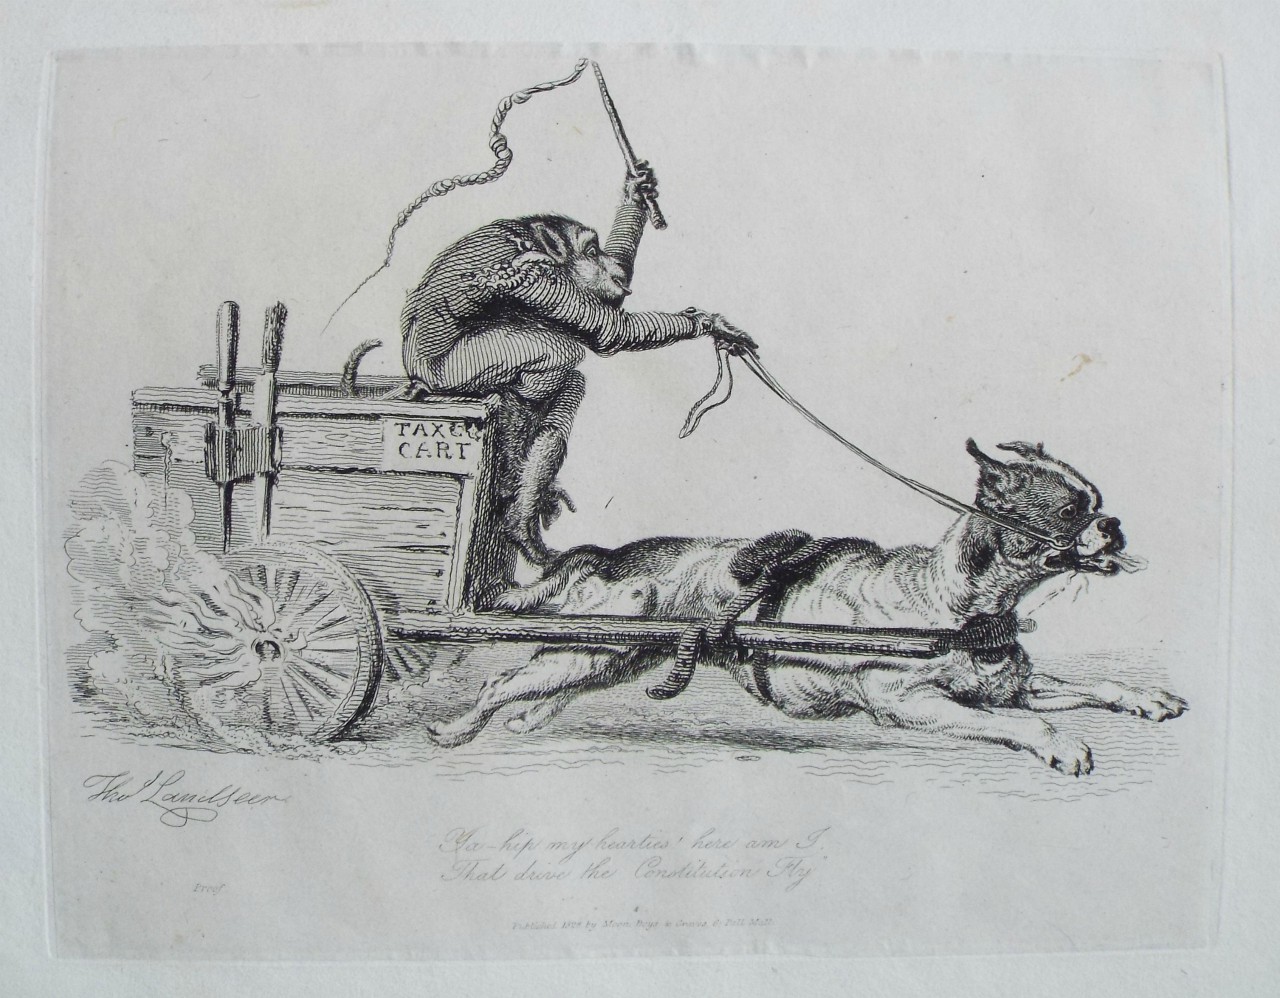 Etching - Ya hip my hearties here am I
That drive the Constitution Fly. - Landseer